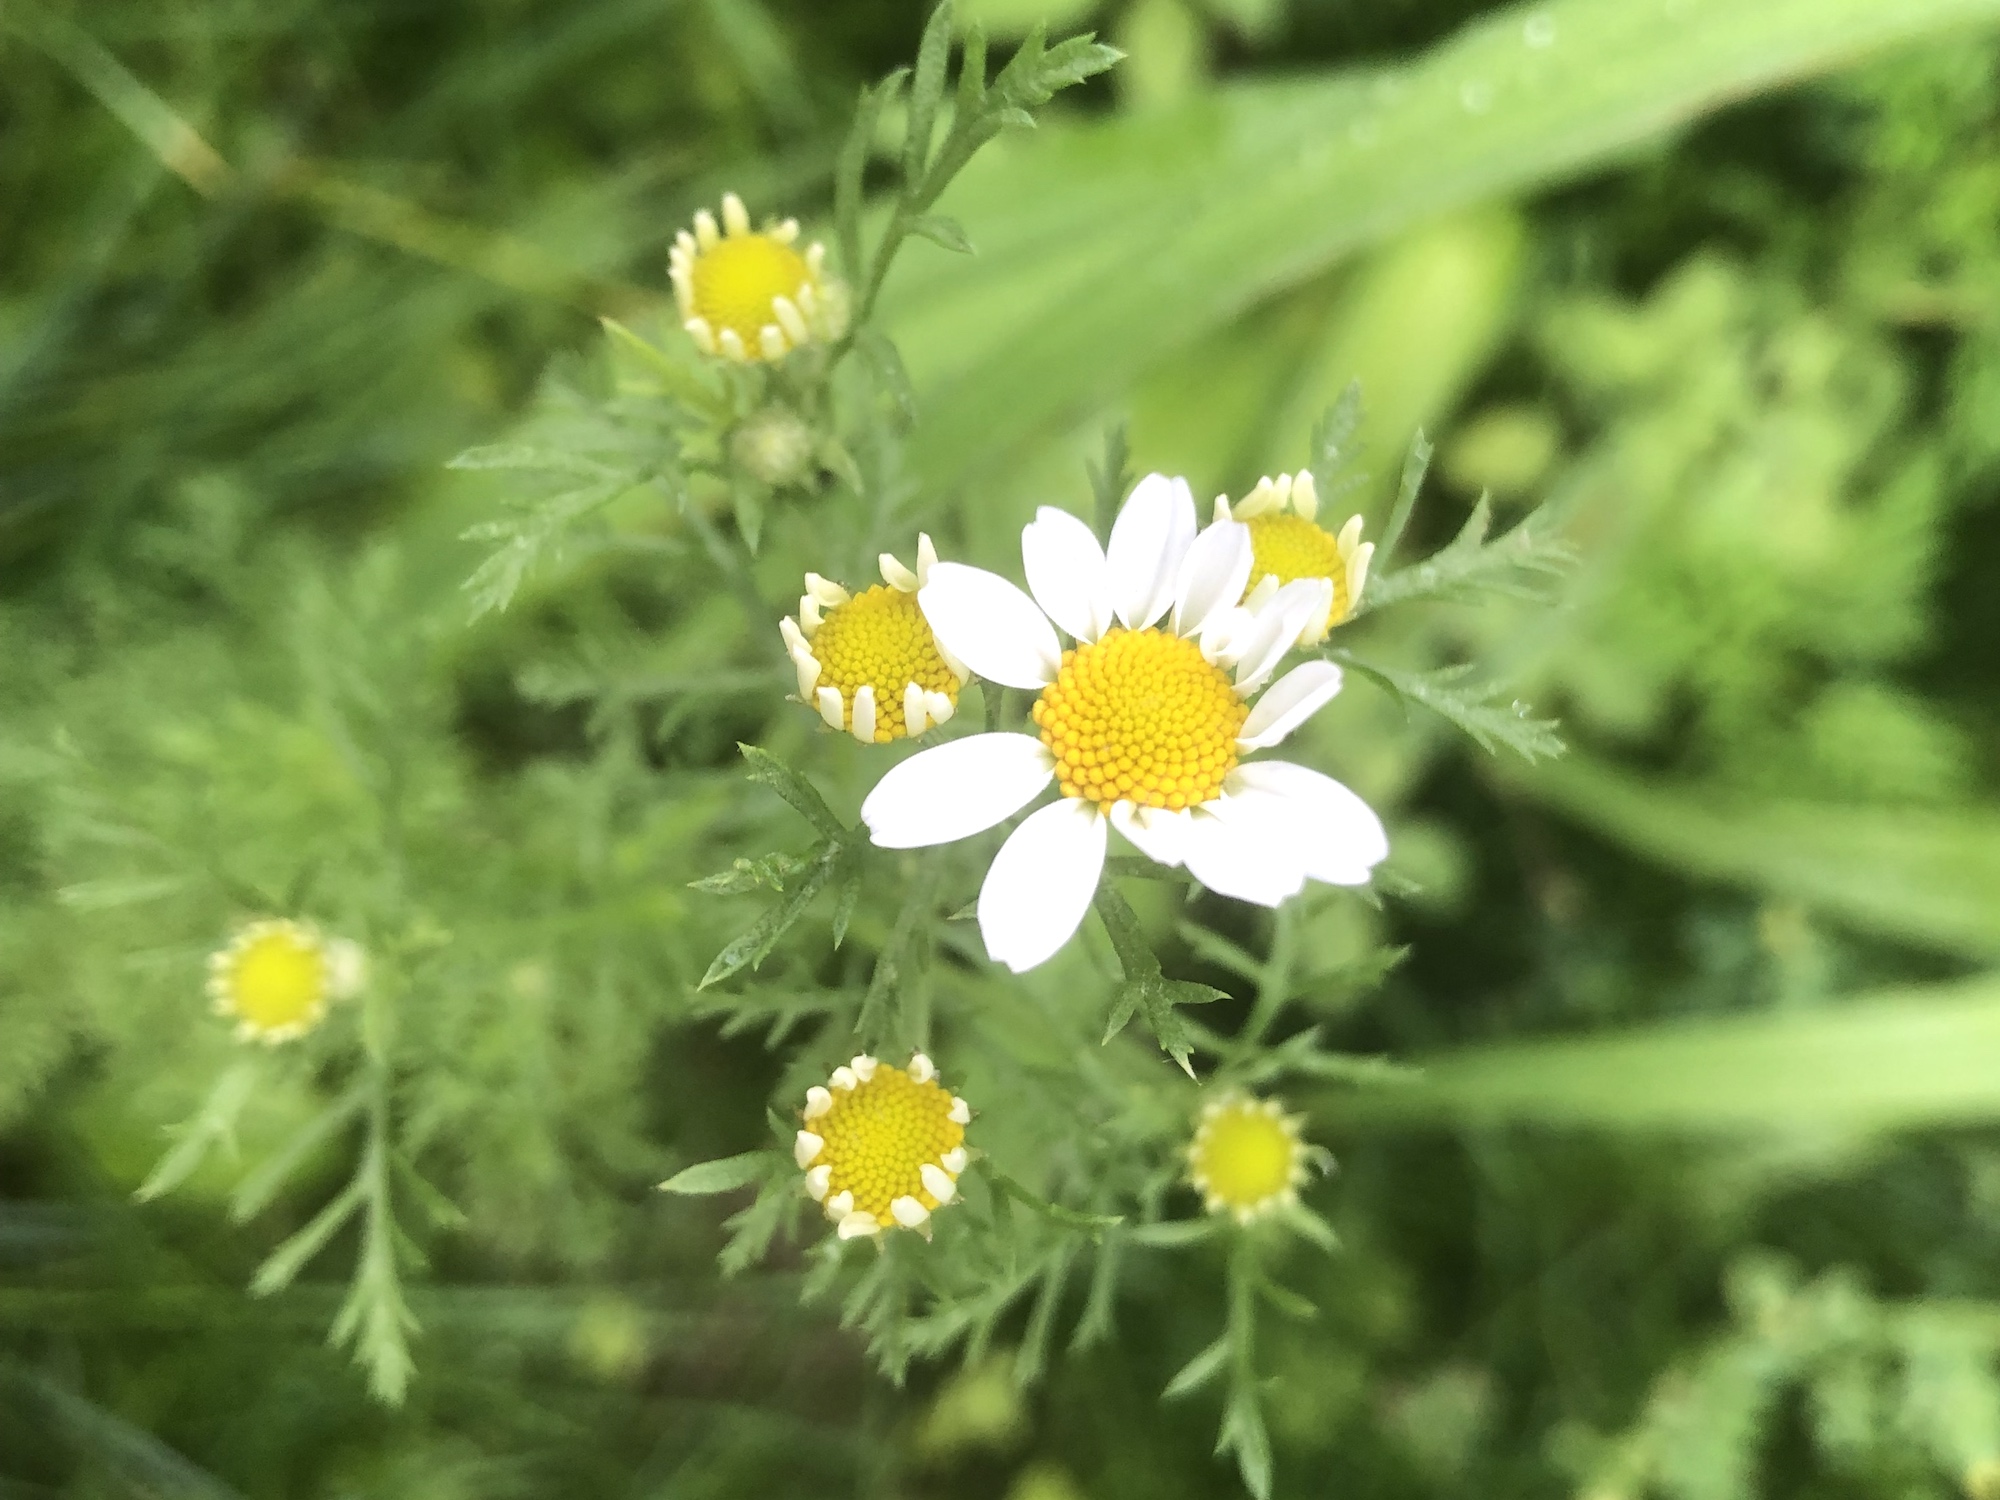 Chamomile in grass between Monroe Street sidewalk and Marion Dunn woods in Madison, Wisconsin on July 2, 2019.